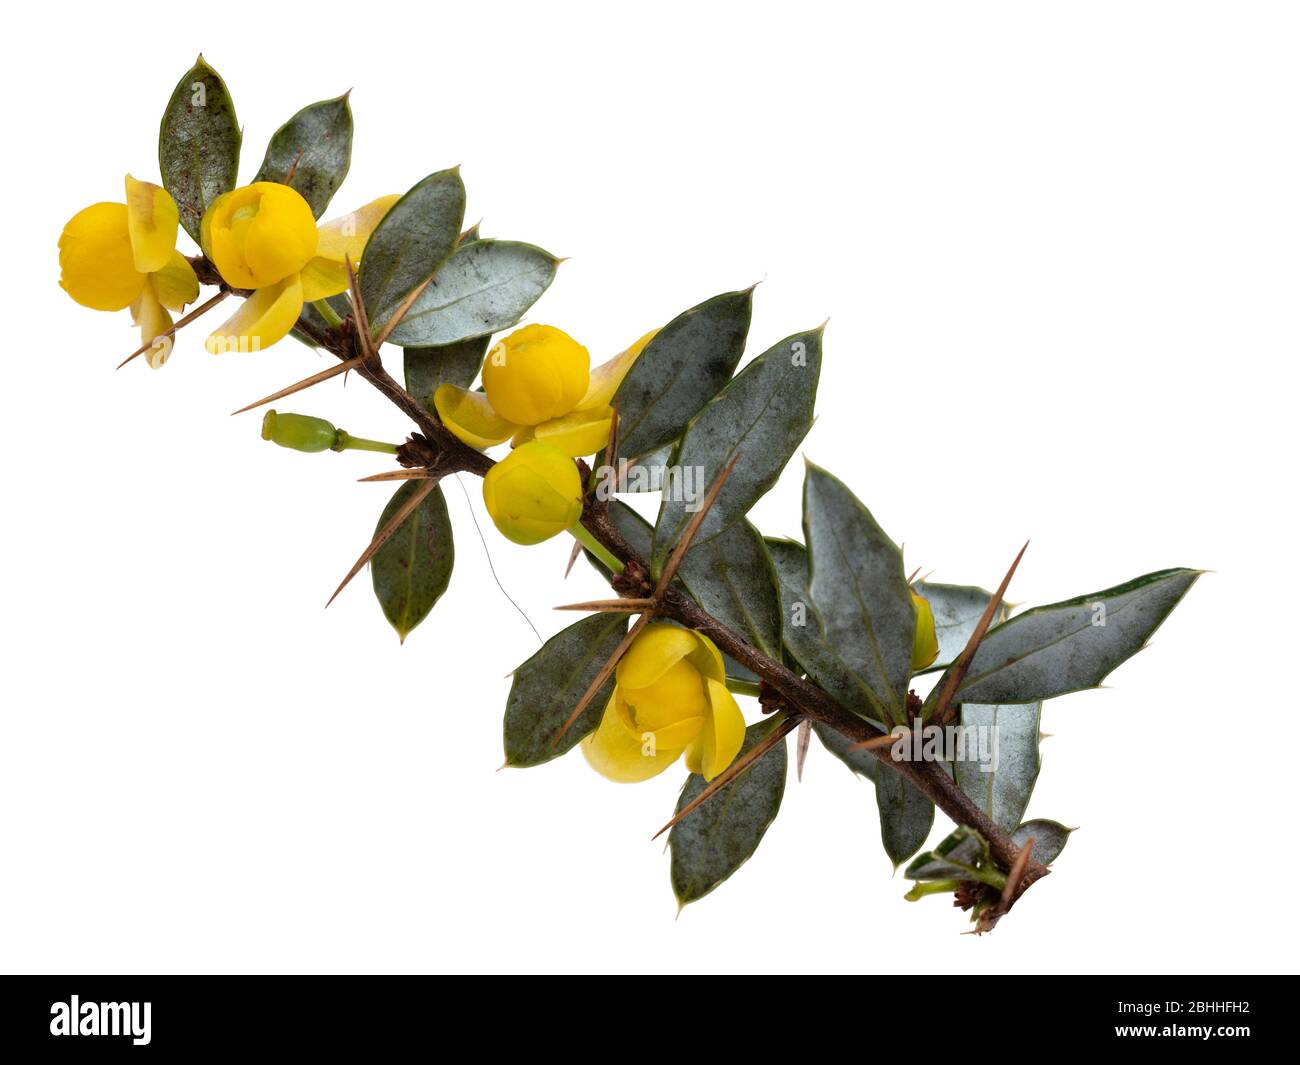 Isolated flowering branch of the warty barberry, Berberis verruculosa, a hardy evergreen shrub on a white background Stock Photo